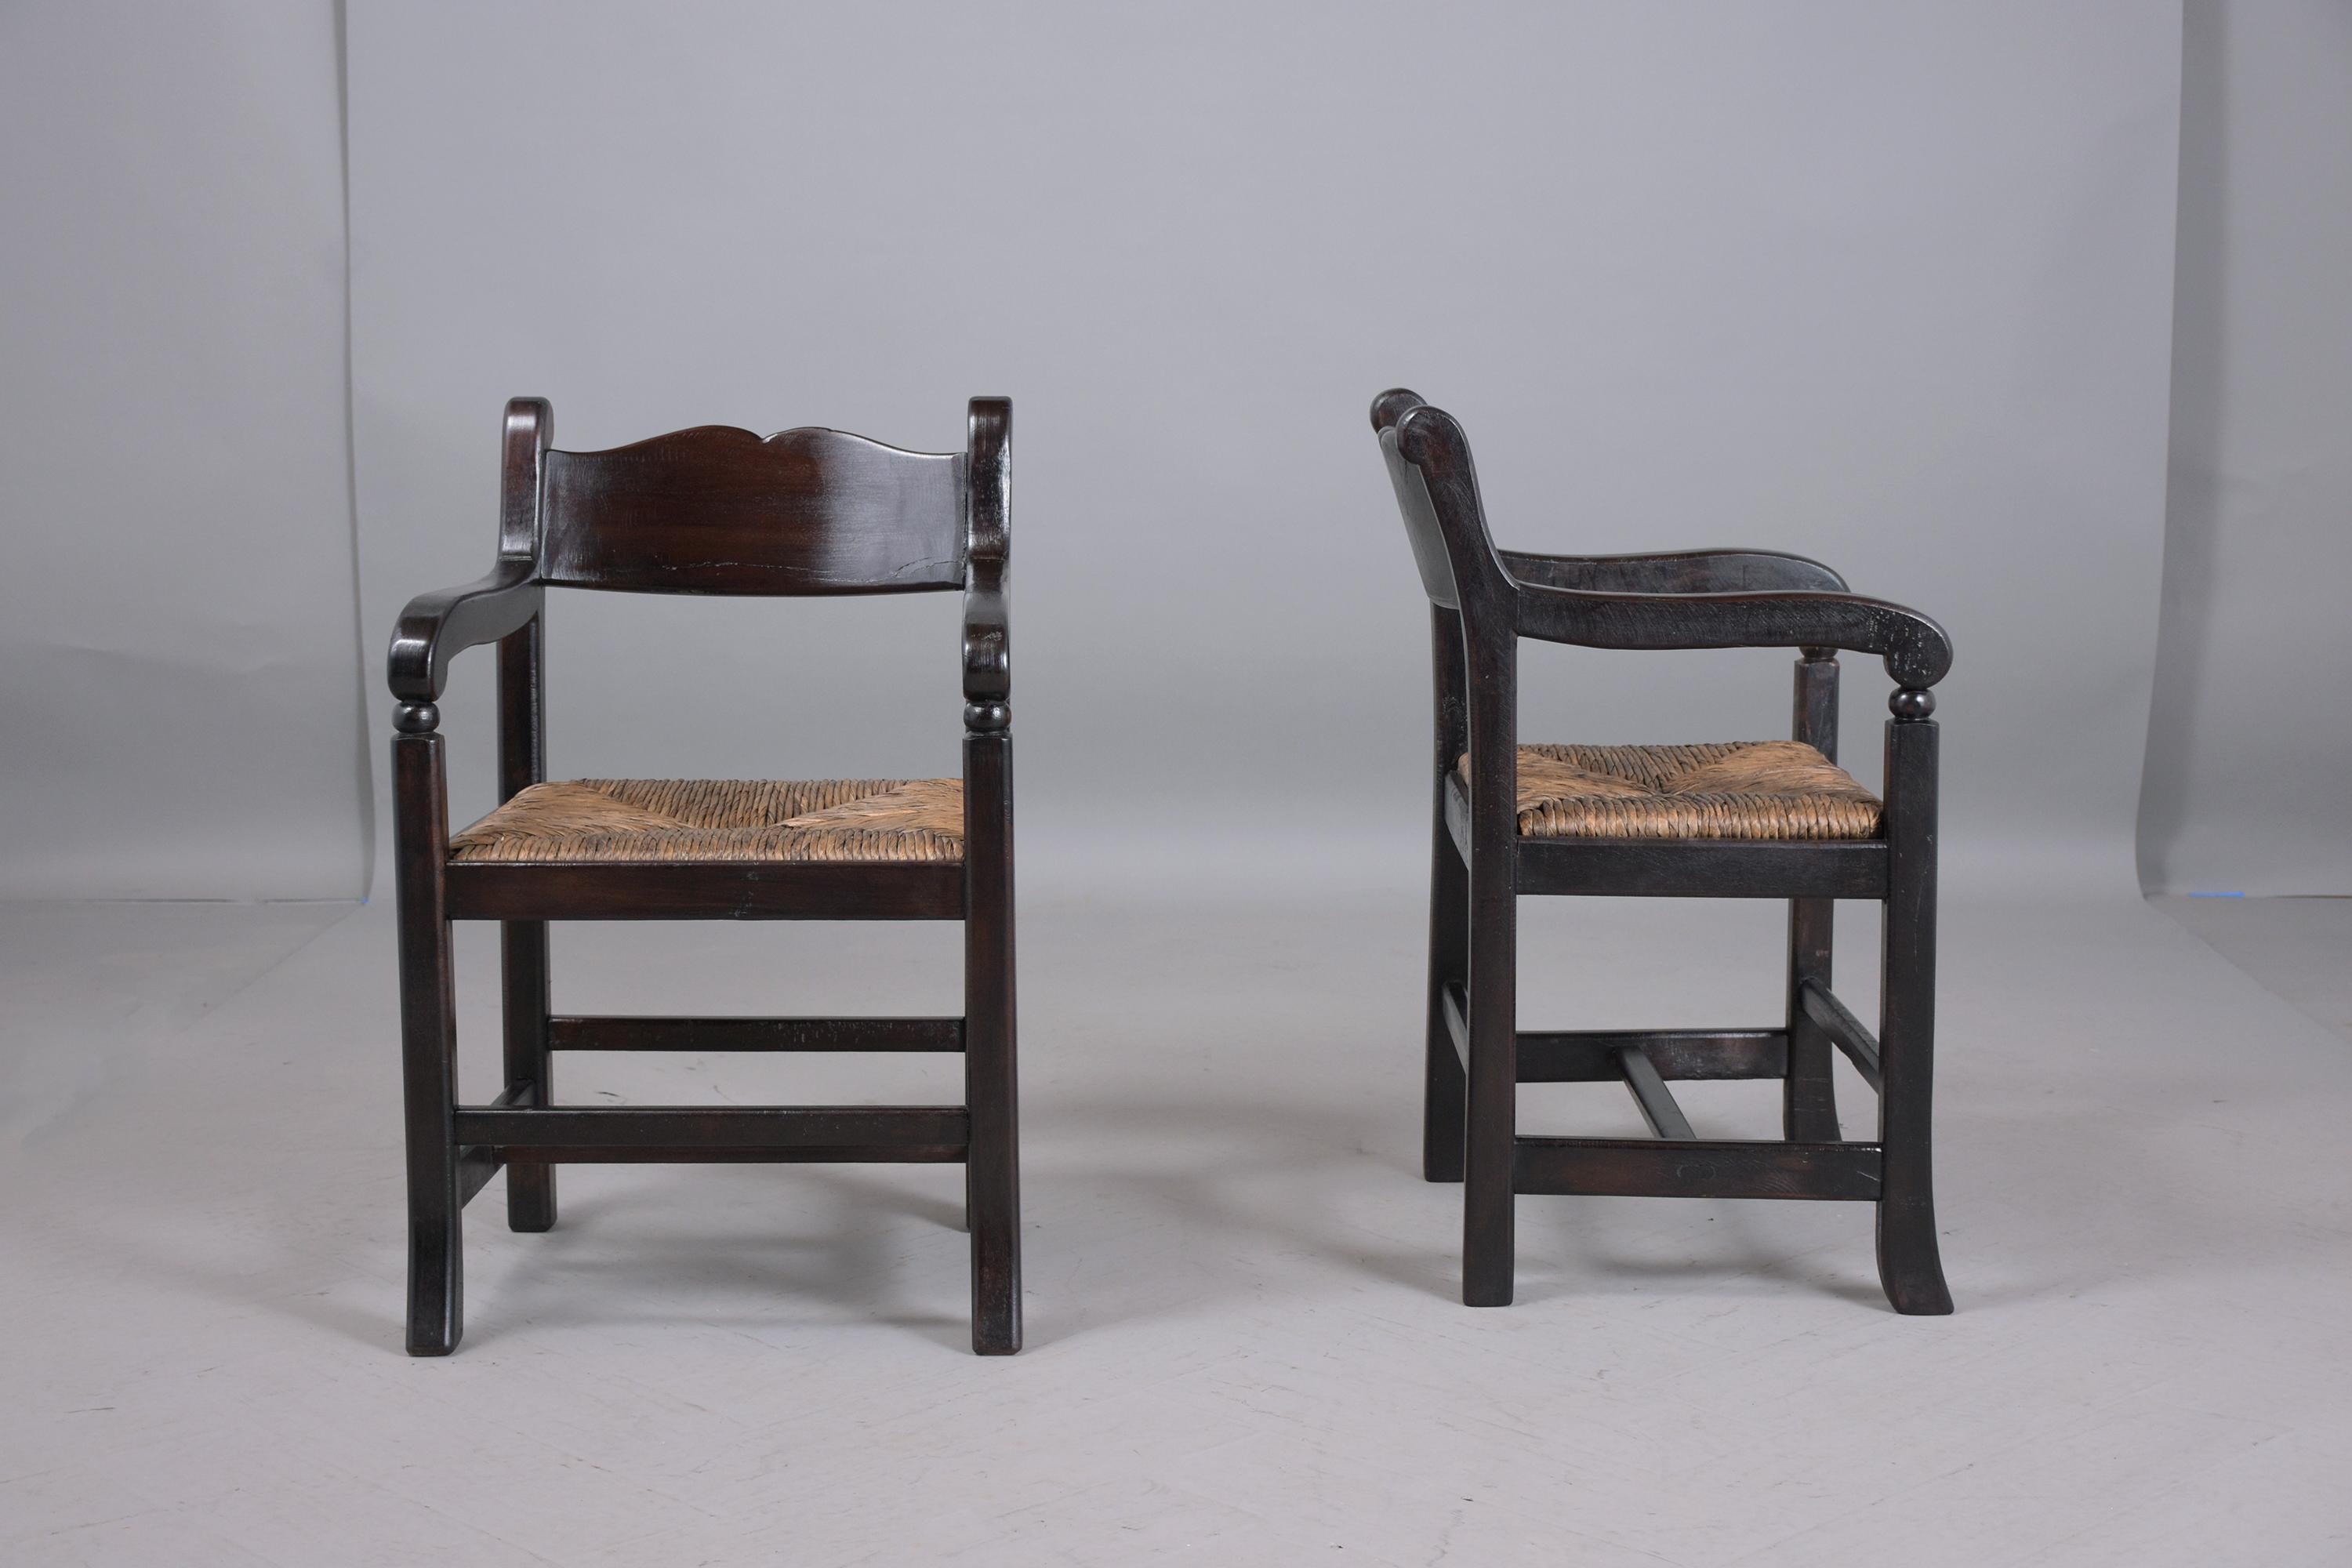 This pair of vintage armchairs are hand-crafted out of teak wood in good condition and features an ebonized color with a beautiful patina finish. The lounge chairs have carved frames with stretched legs and comfortable rush seats. The chairs are